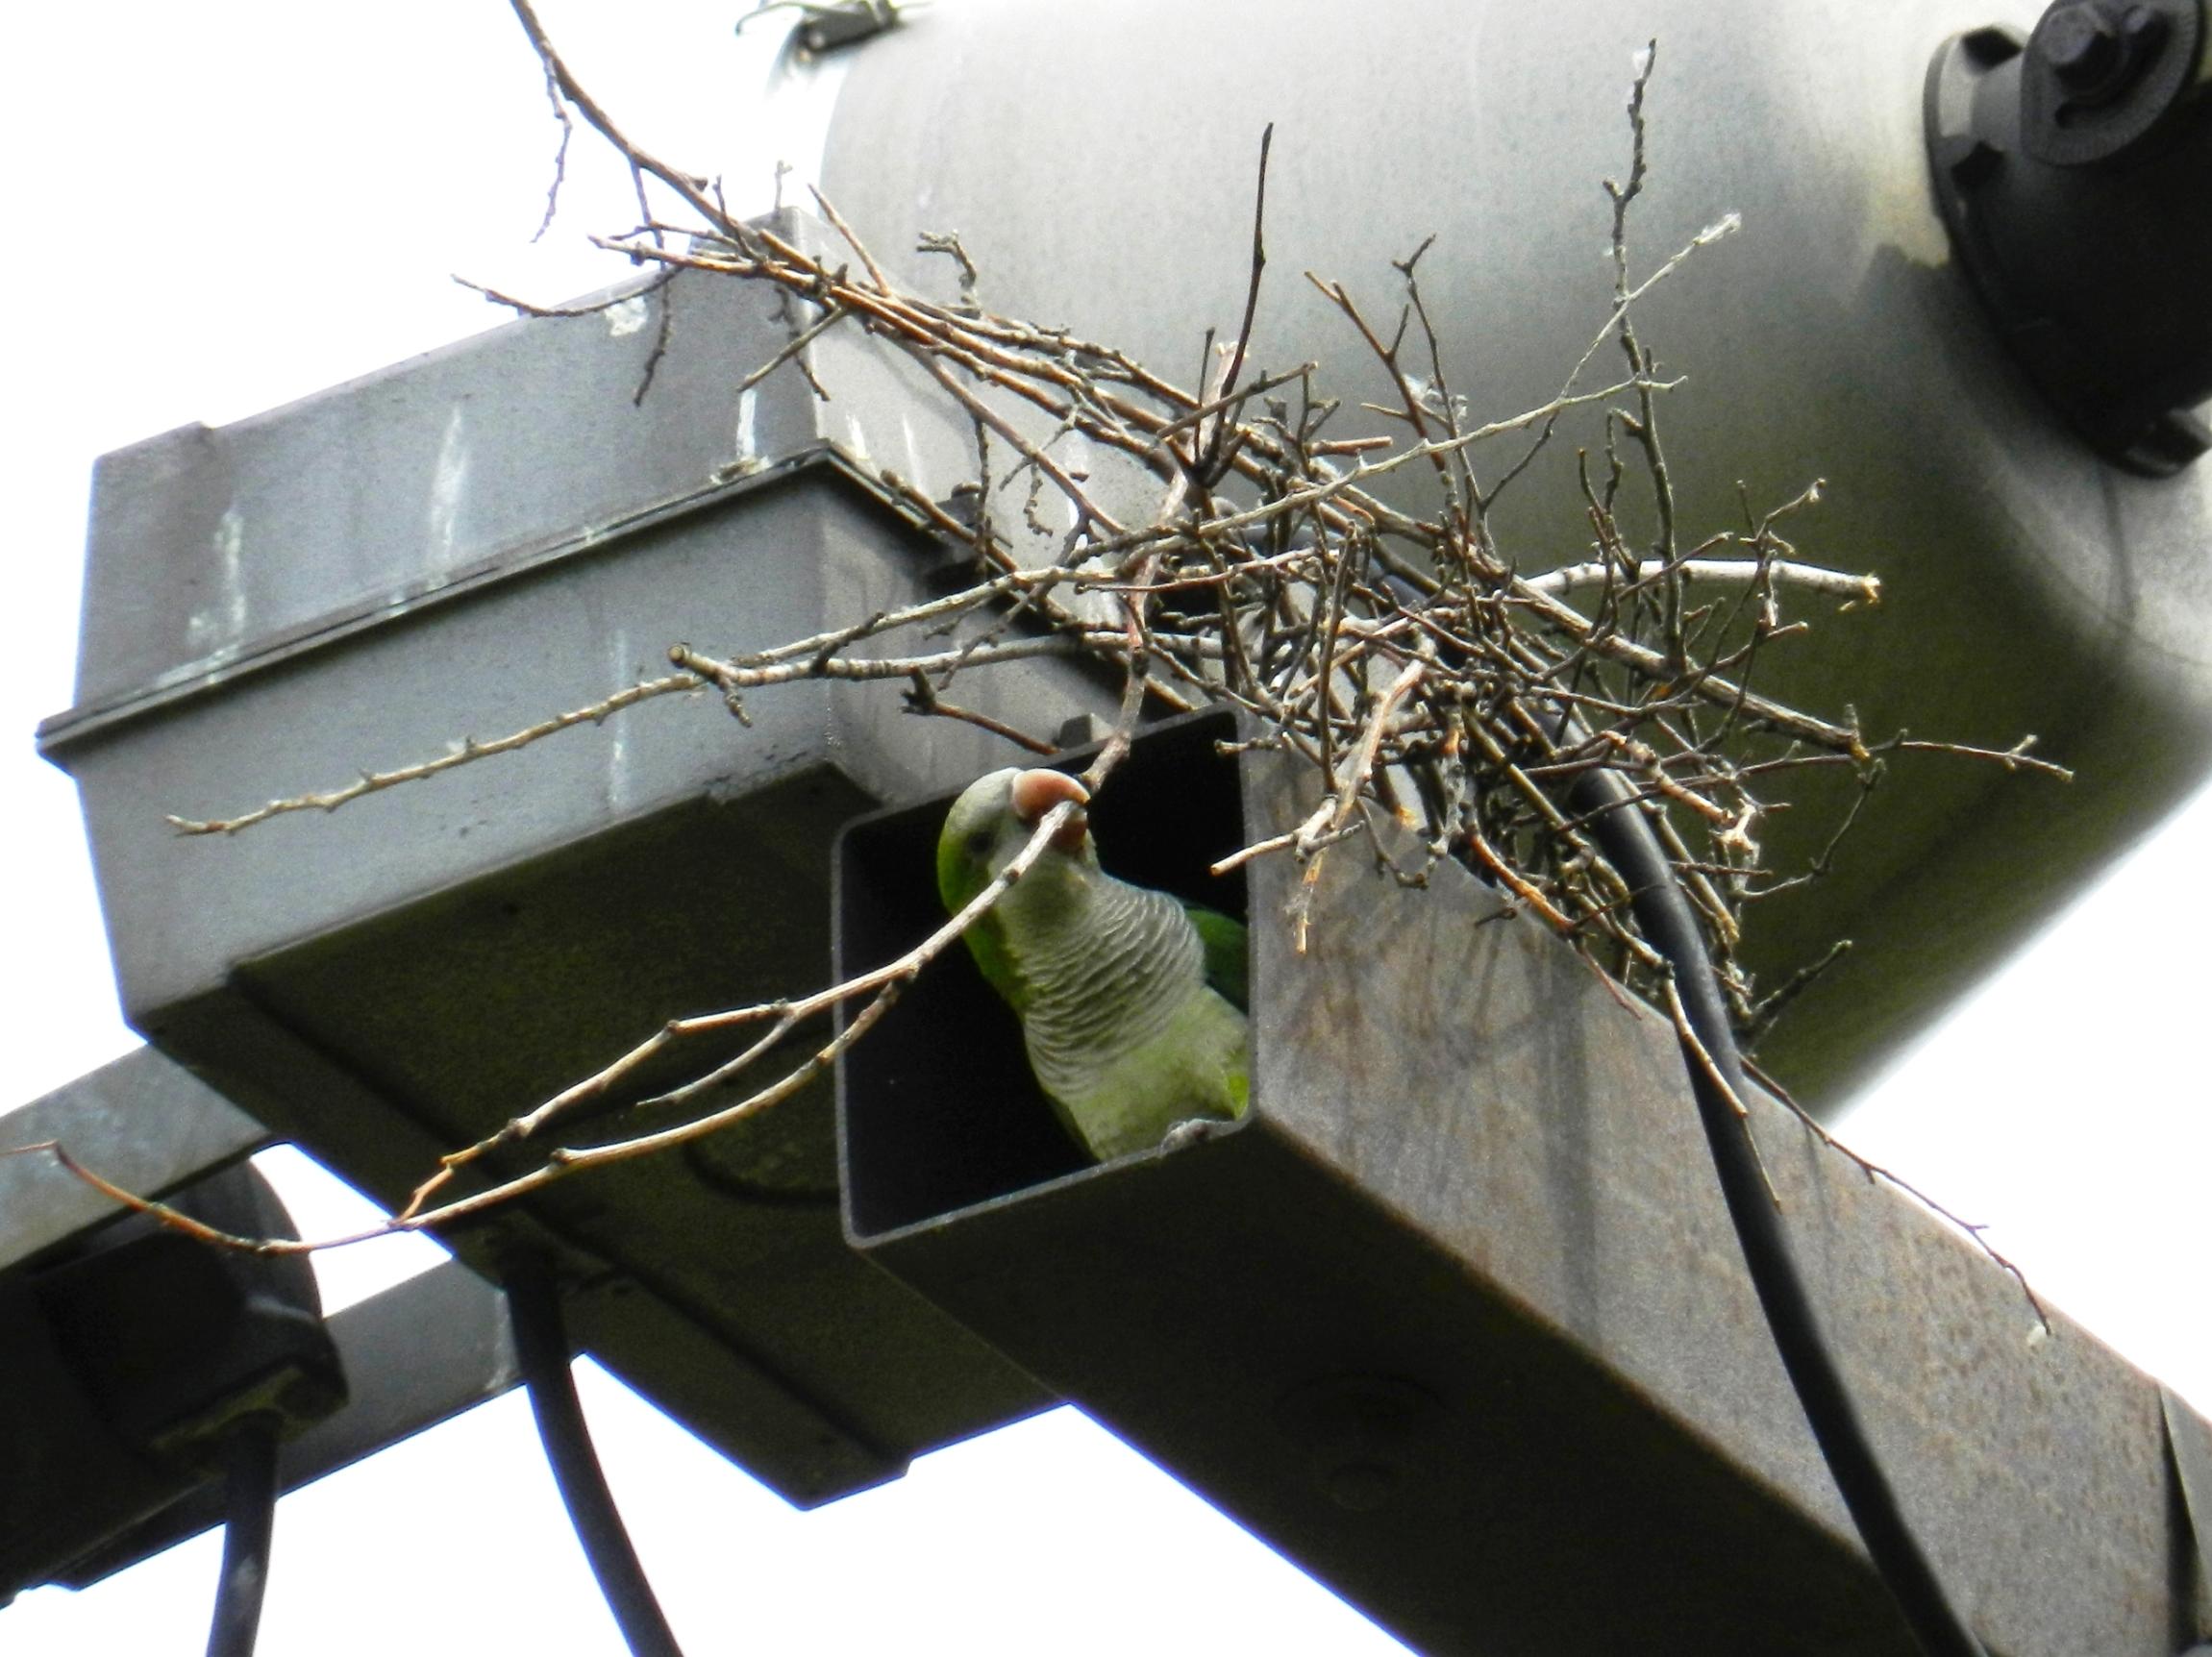 Monk parakeets are attracted to man-made structures like utility poles, where they have been known to build their nests. (John Iwanski / Flickr)